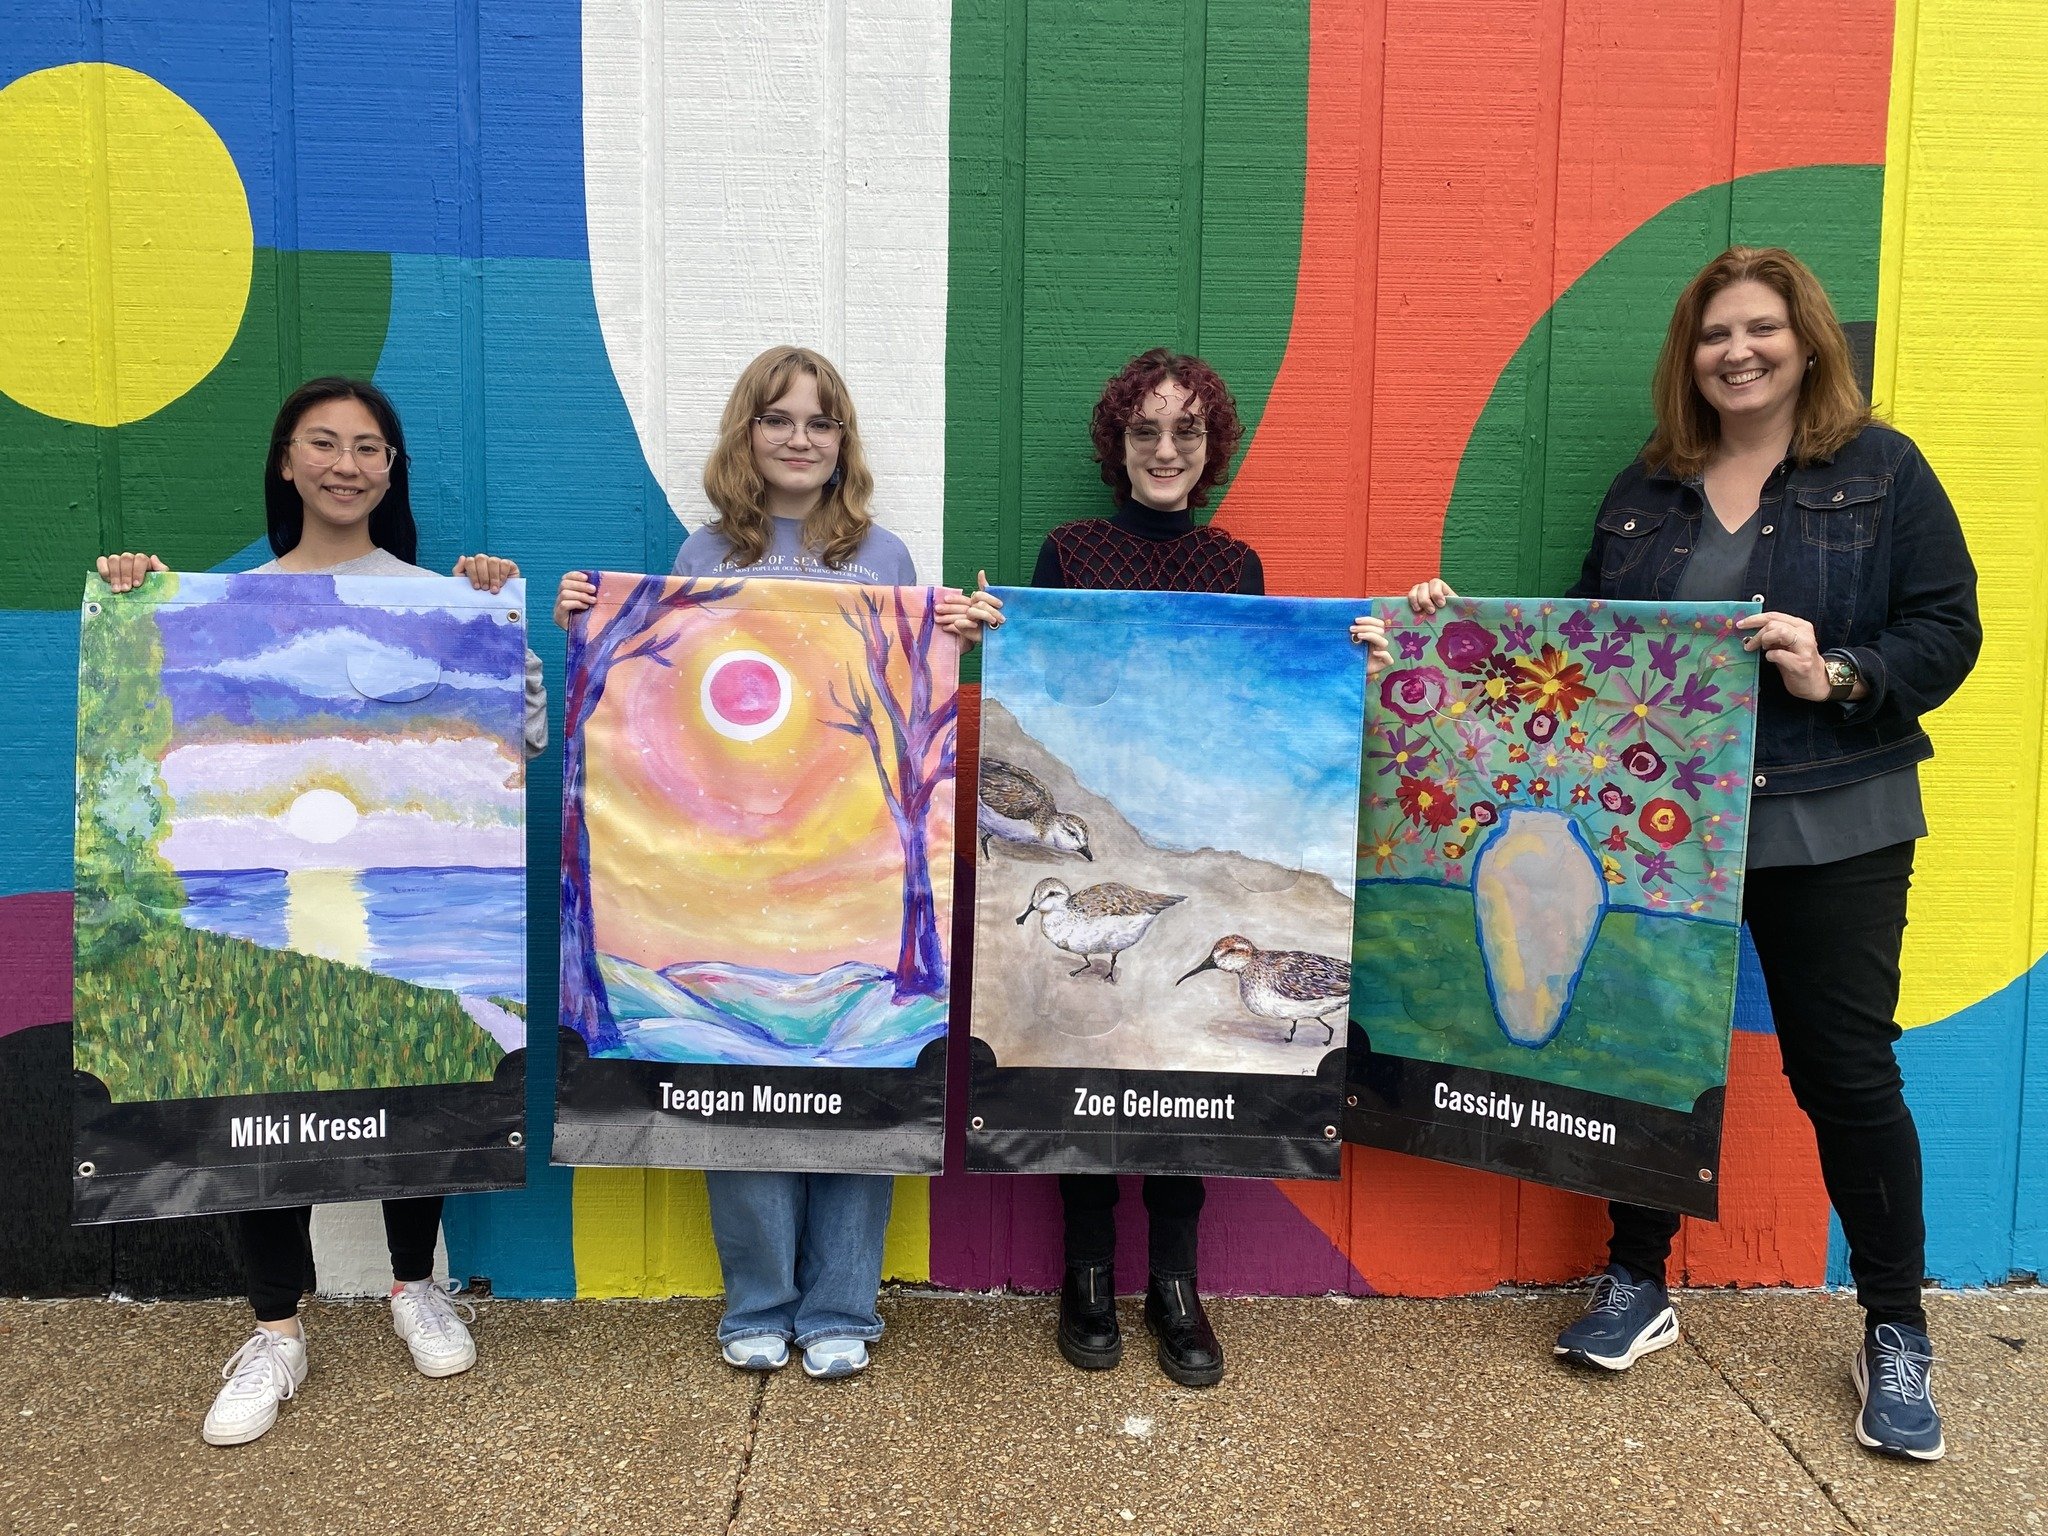 Banner day for CAC young artists! ❤

Four young artists from CAC had their artwork chosen for the new downtown Chesterton banners. Miki Kresal, Teagan Monroe, Zoe Gelement, and Cassidy Hansen (not pictured) here with CAC Instructor, Jennifer Aitchiso